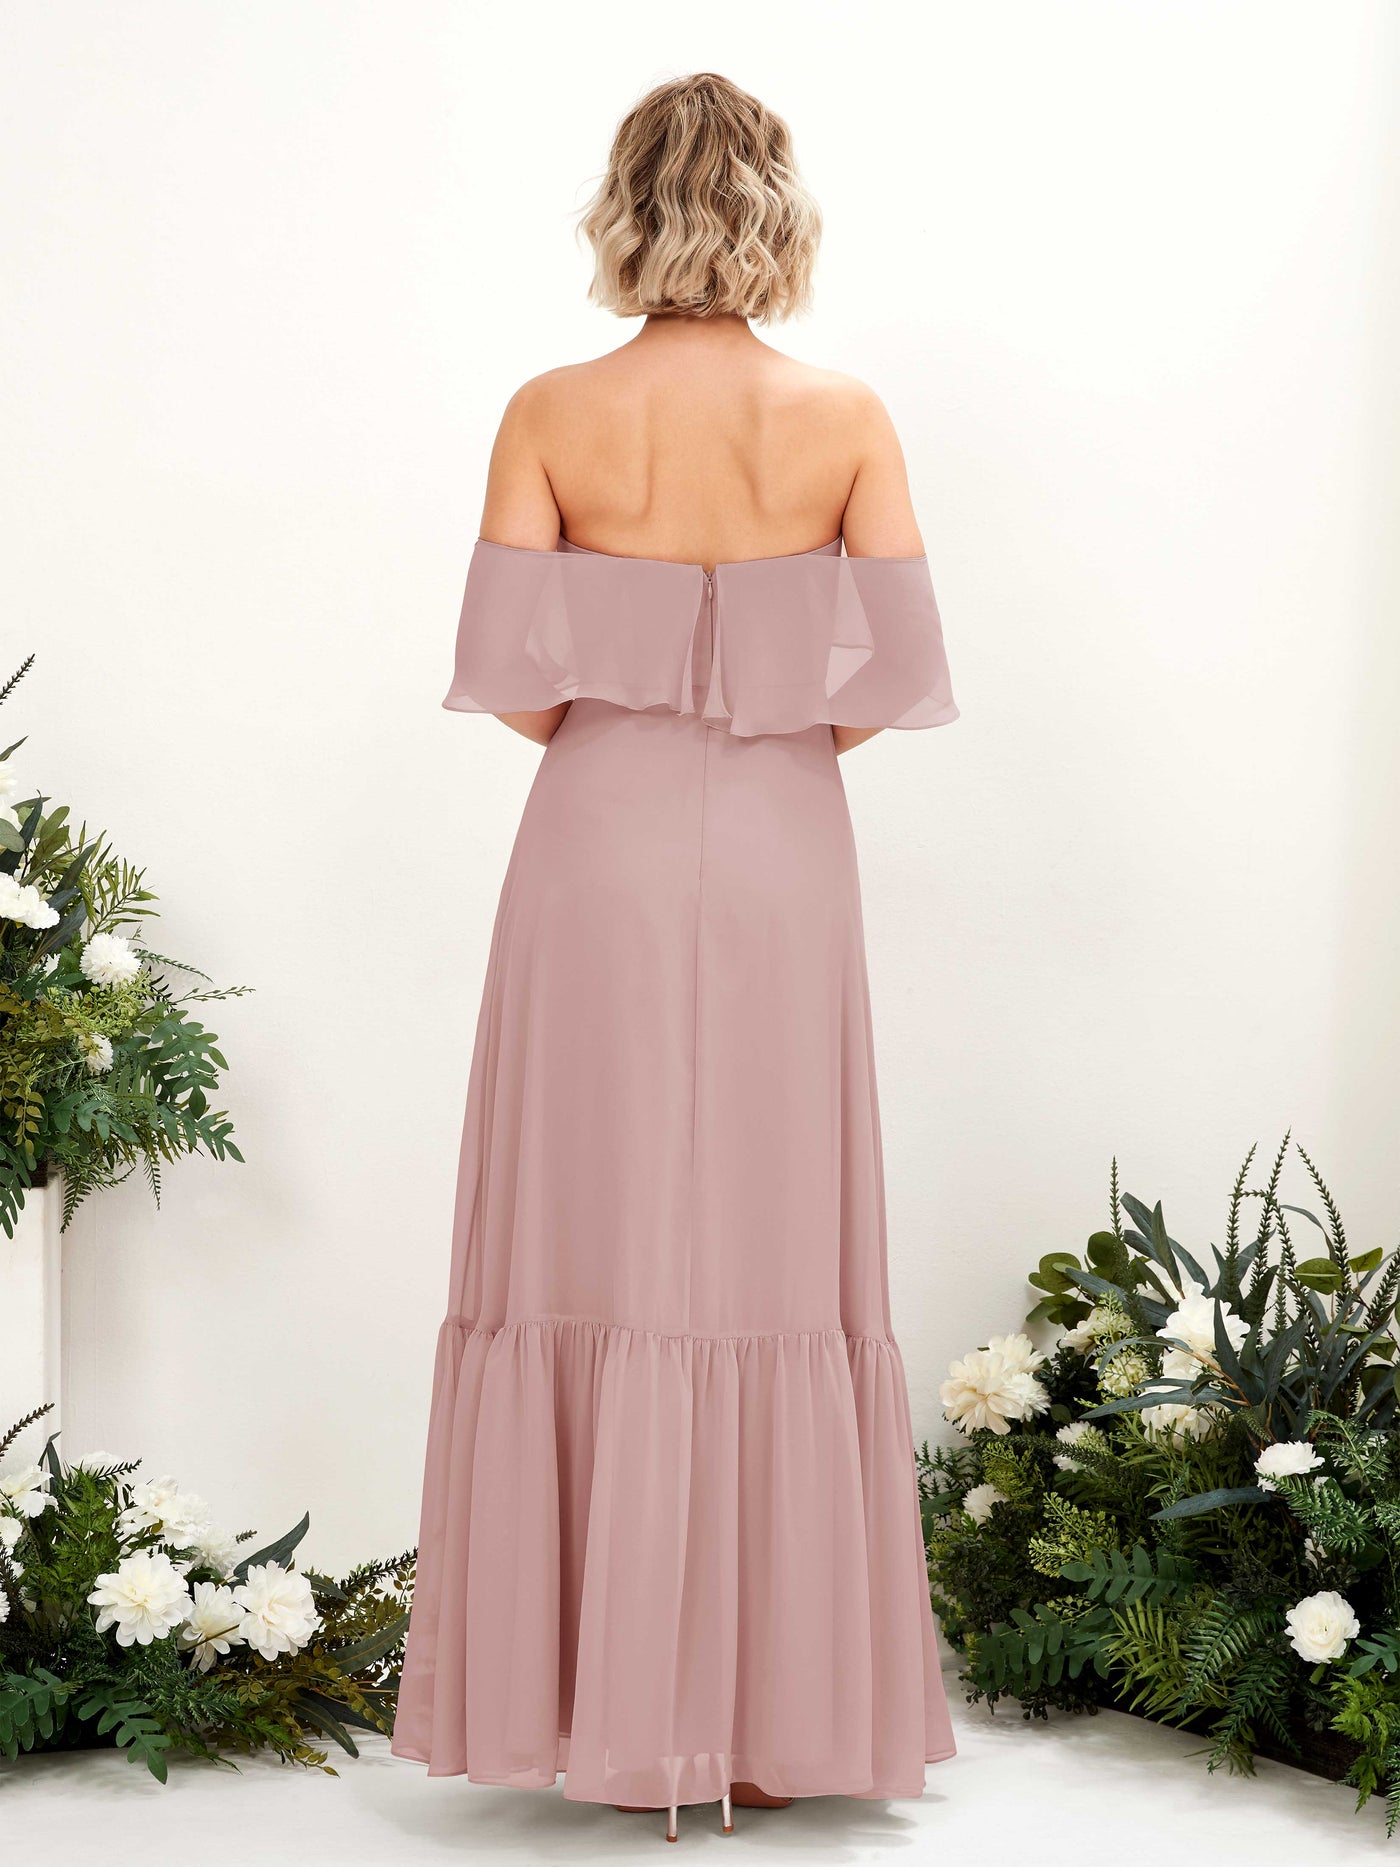 Dusty Rose Bridesmaid Dresses Bridesmaid Dress A-line Chiffon Off Shoulder Full Length Sleeveless Wedding Party Dress (81224509)#color_dusty-rose